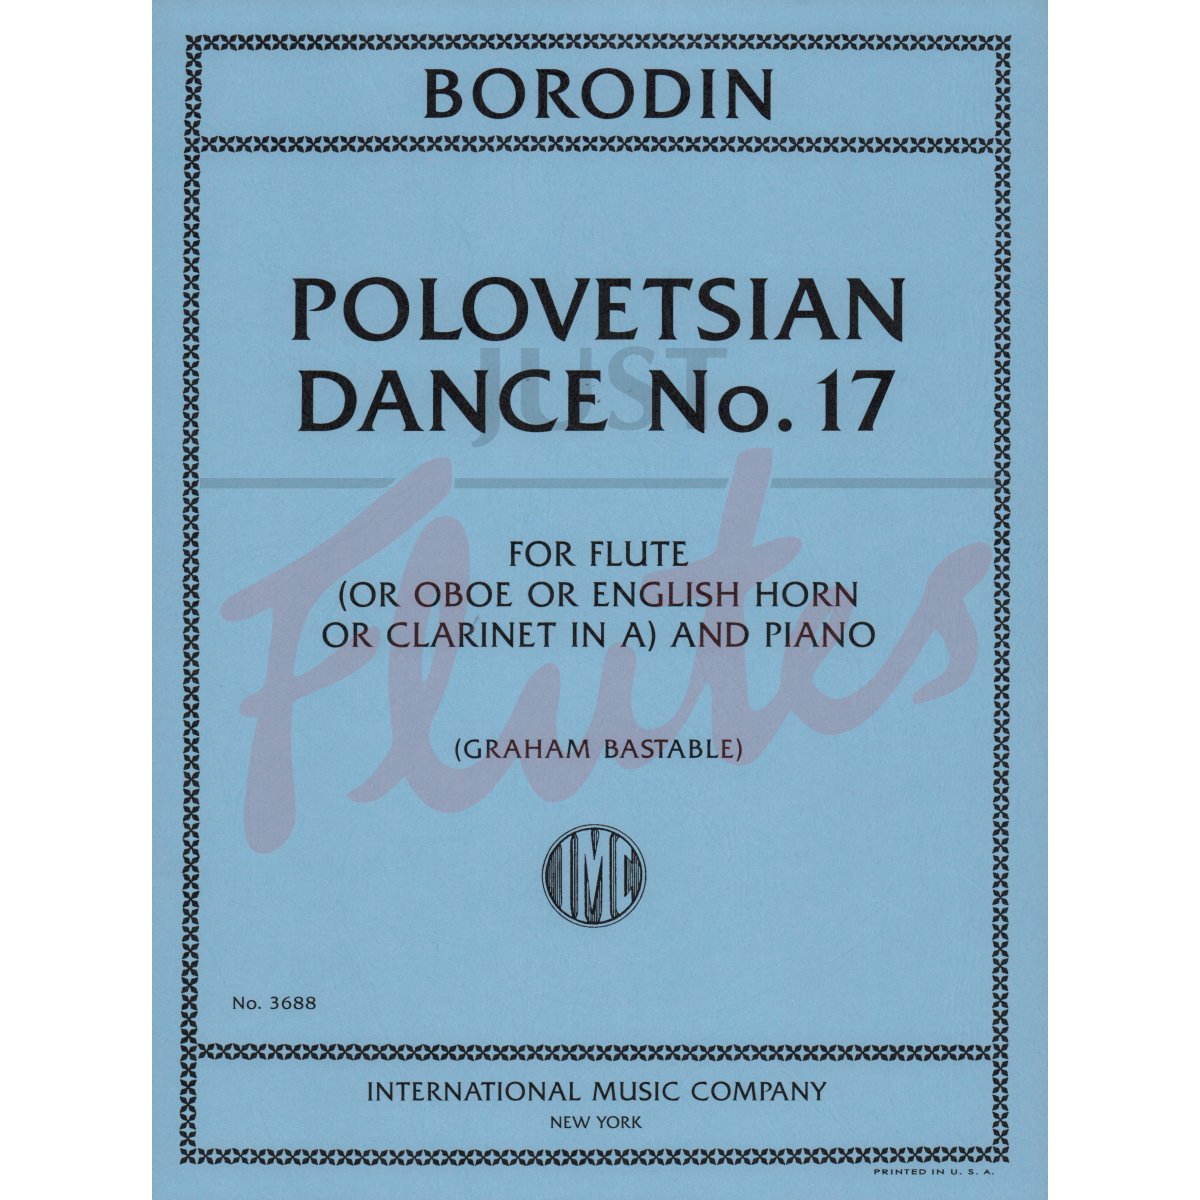 Polovetsian Dance No.17 from Prince Igor for Flute (or Oboe or English Horn or Clarinet in A) and Piano